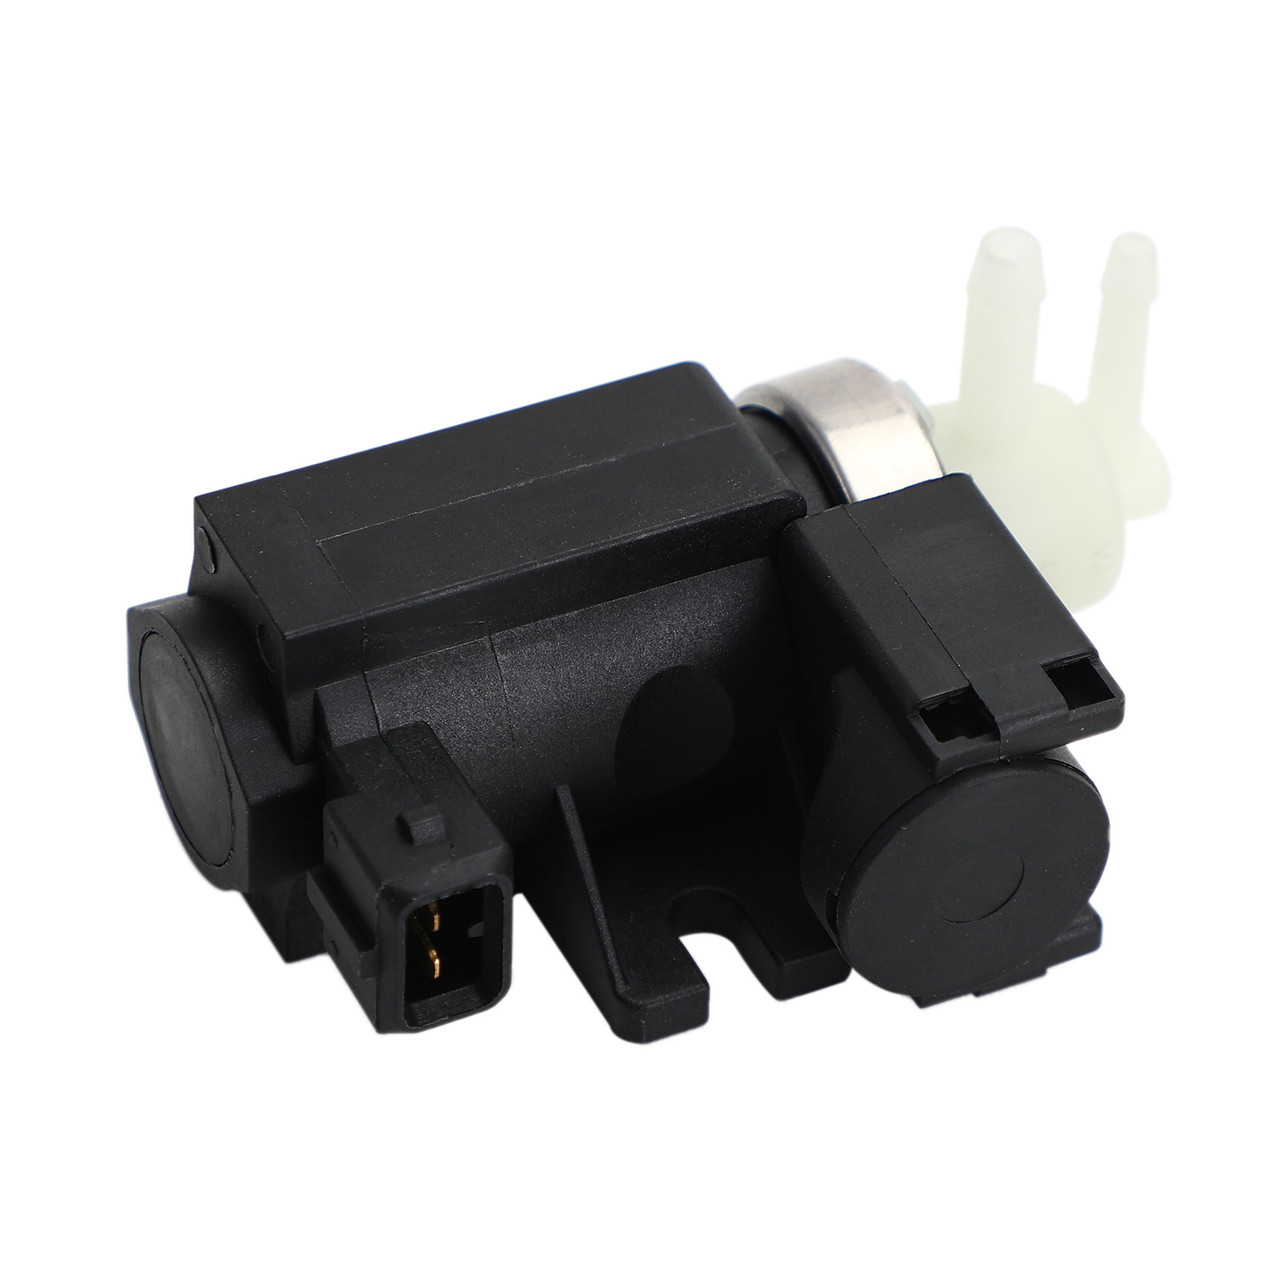 Turbo Boost Control Solenoid Valve Fit For Vauxhall Insignia 2.0 Diesel 55575611 Black